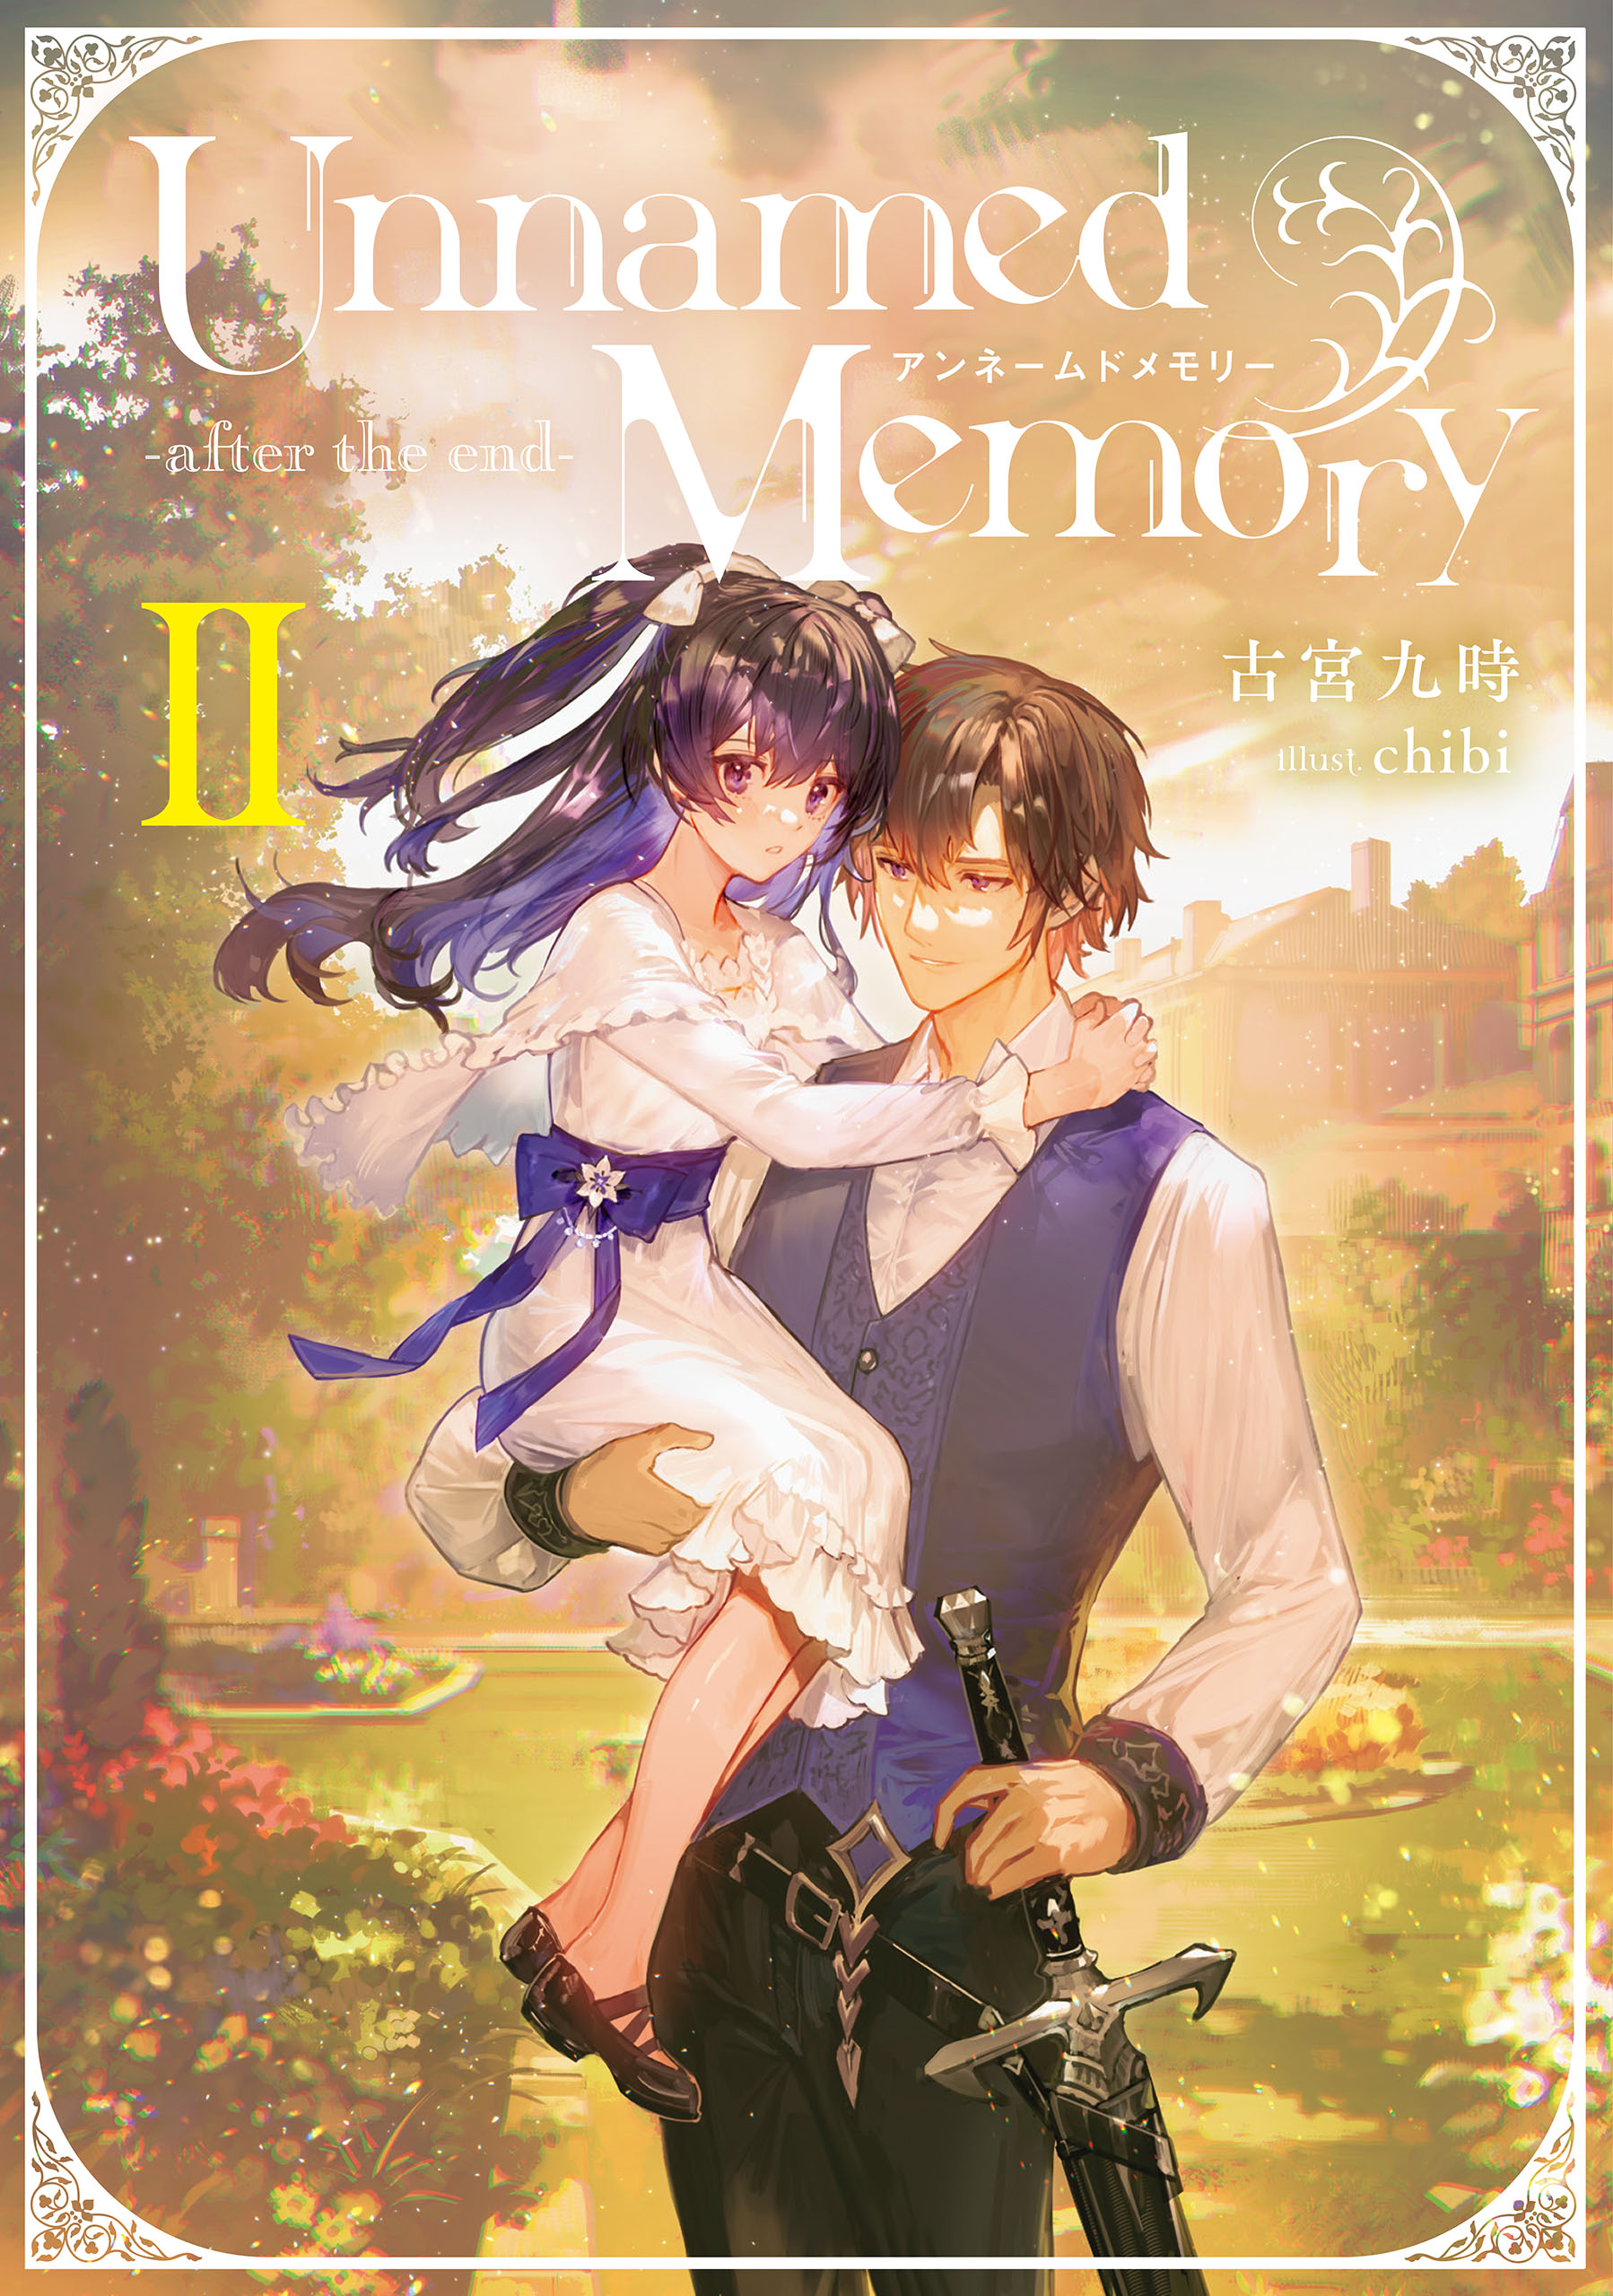 Unnamed Memory -after the end-II - 古宮九時/chibi - ラノベ・無料 